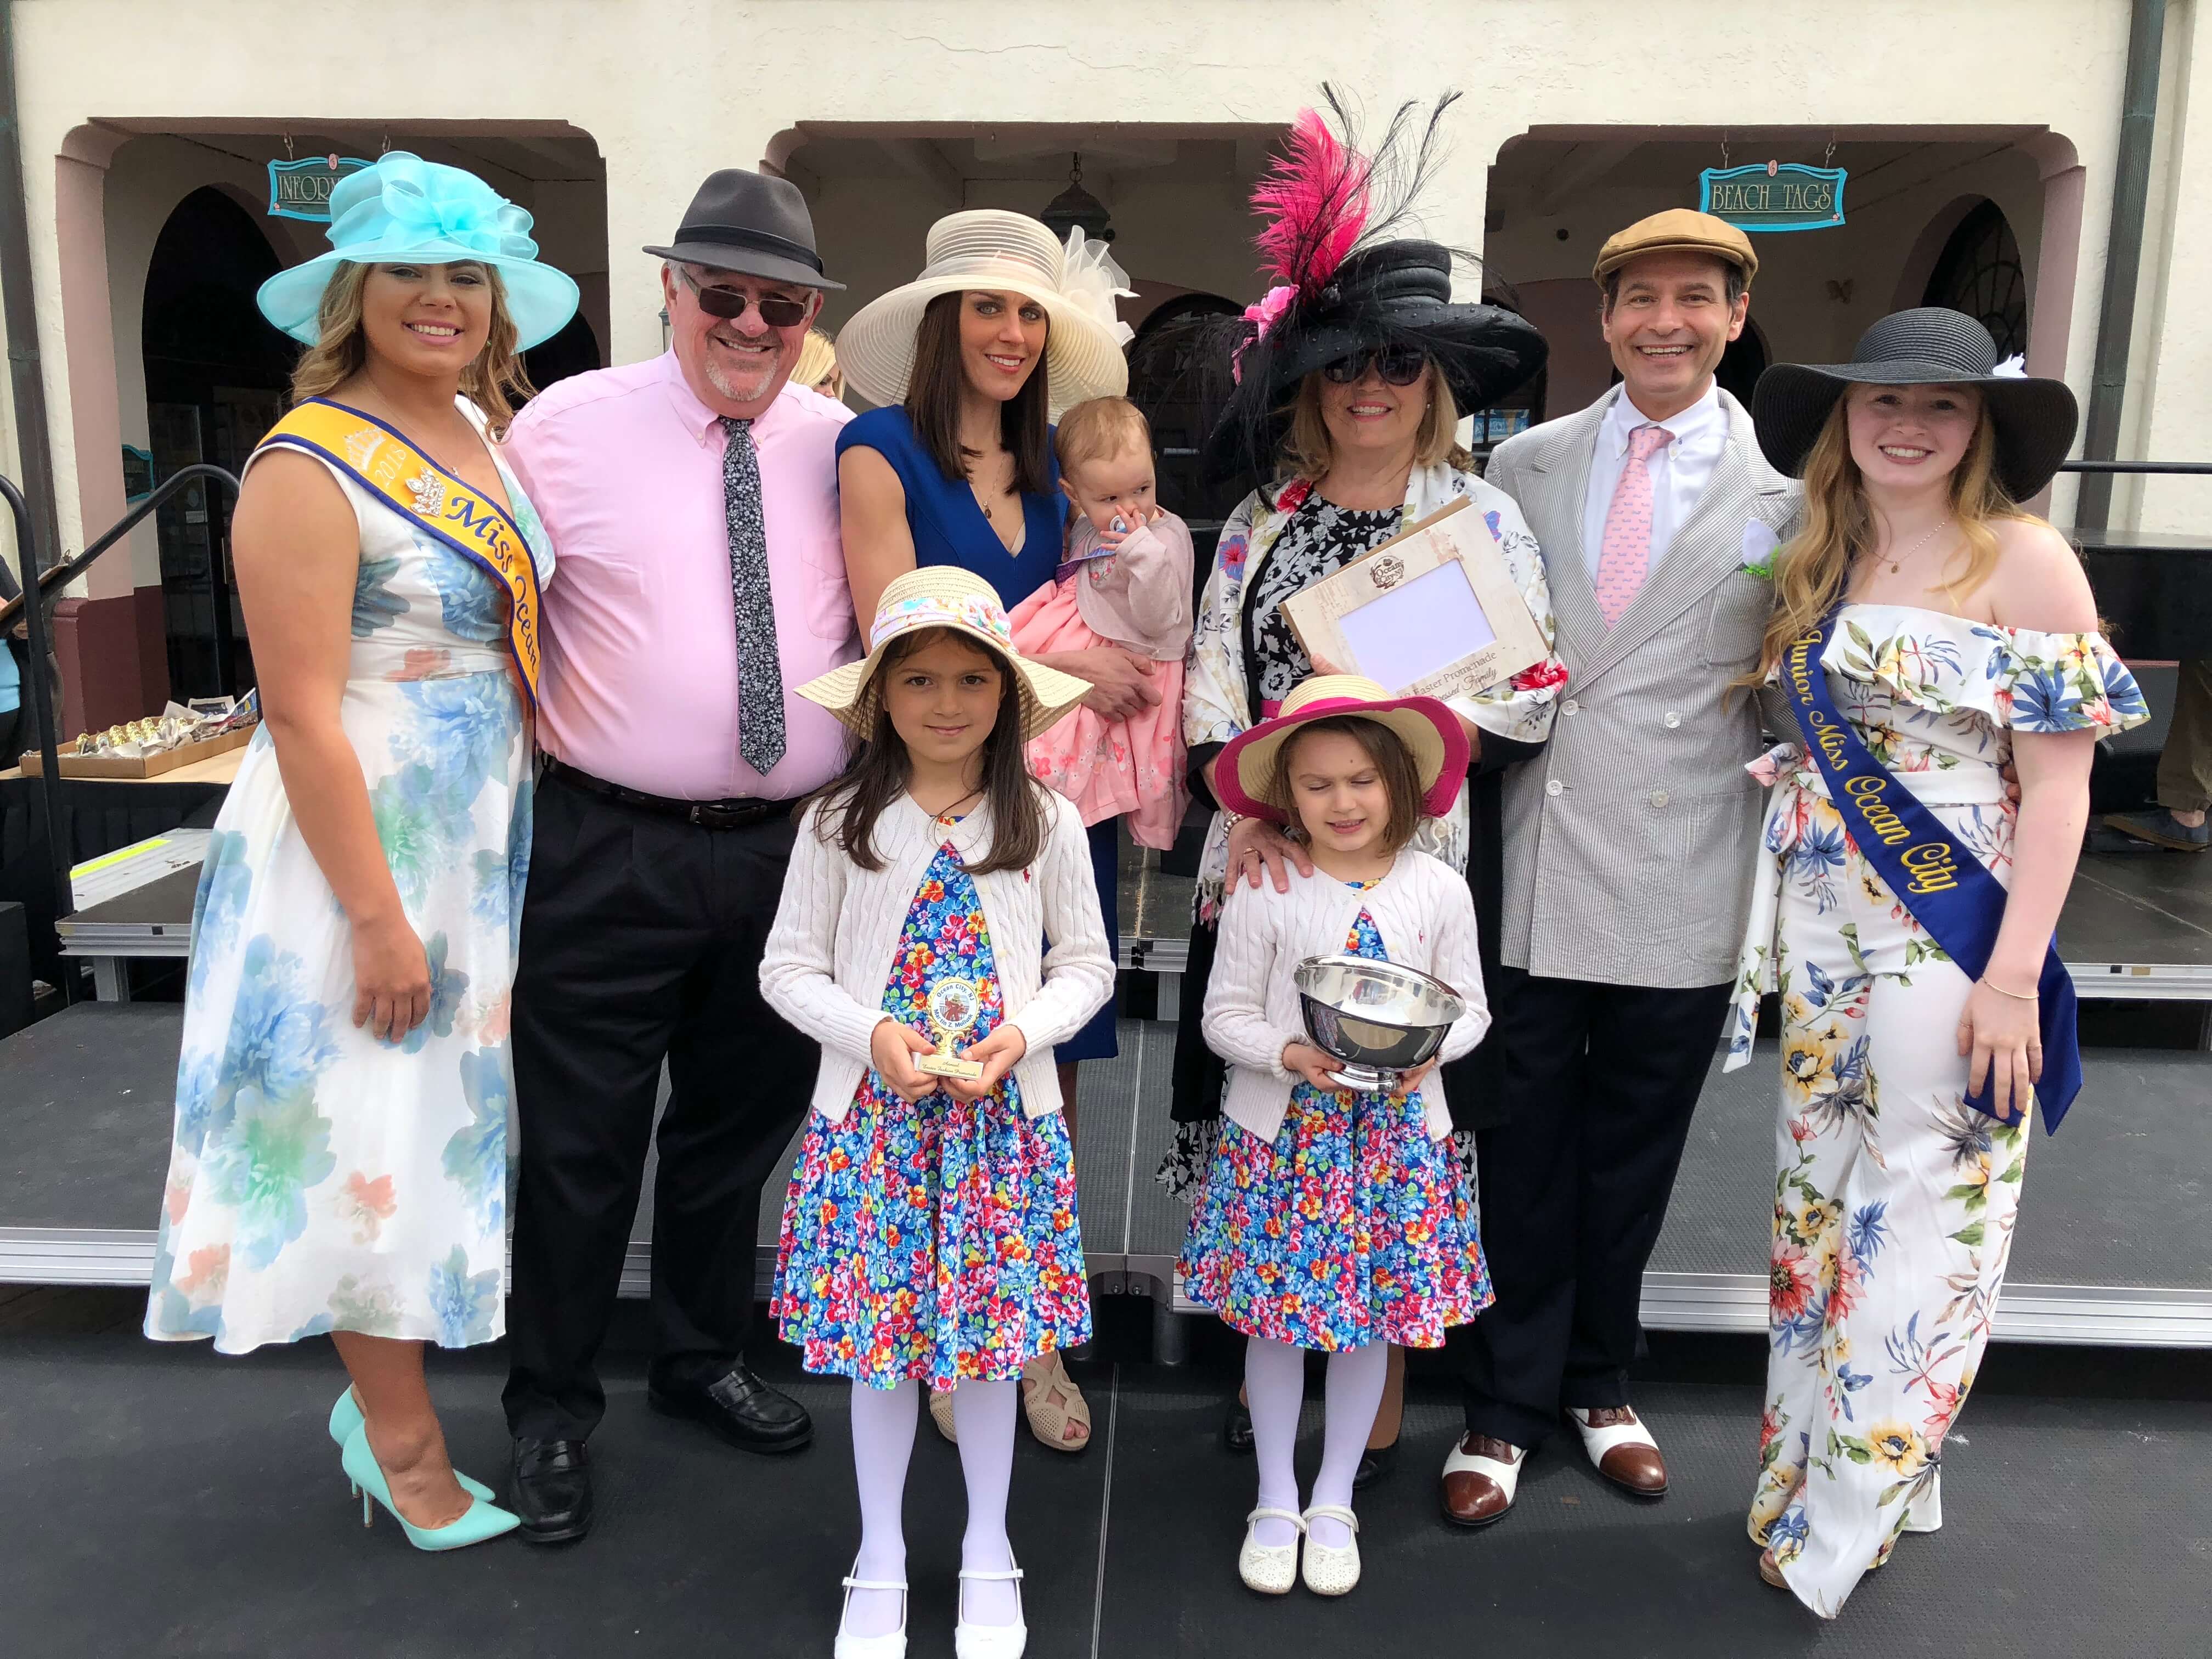 Results of 2018 Ocean City Easter Fashion Promenade Announced